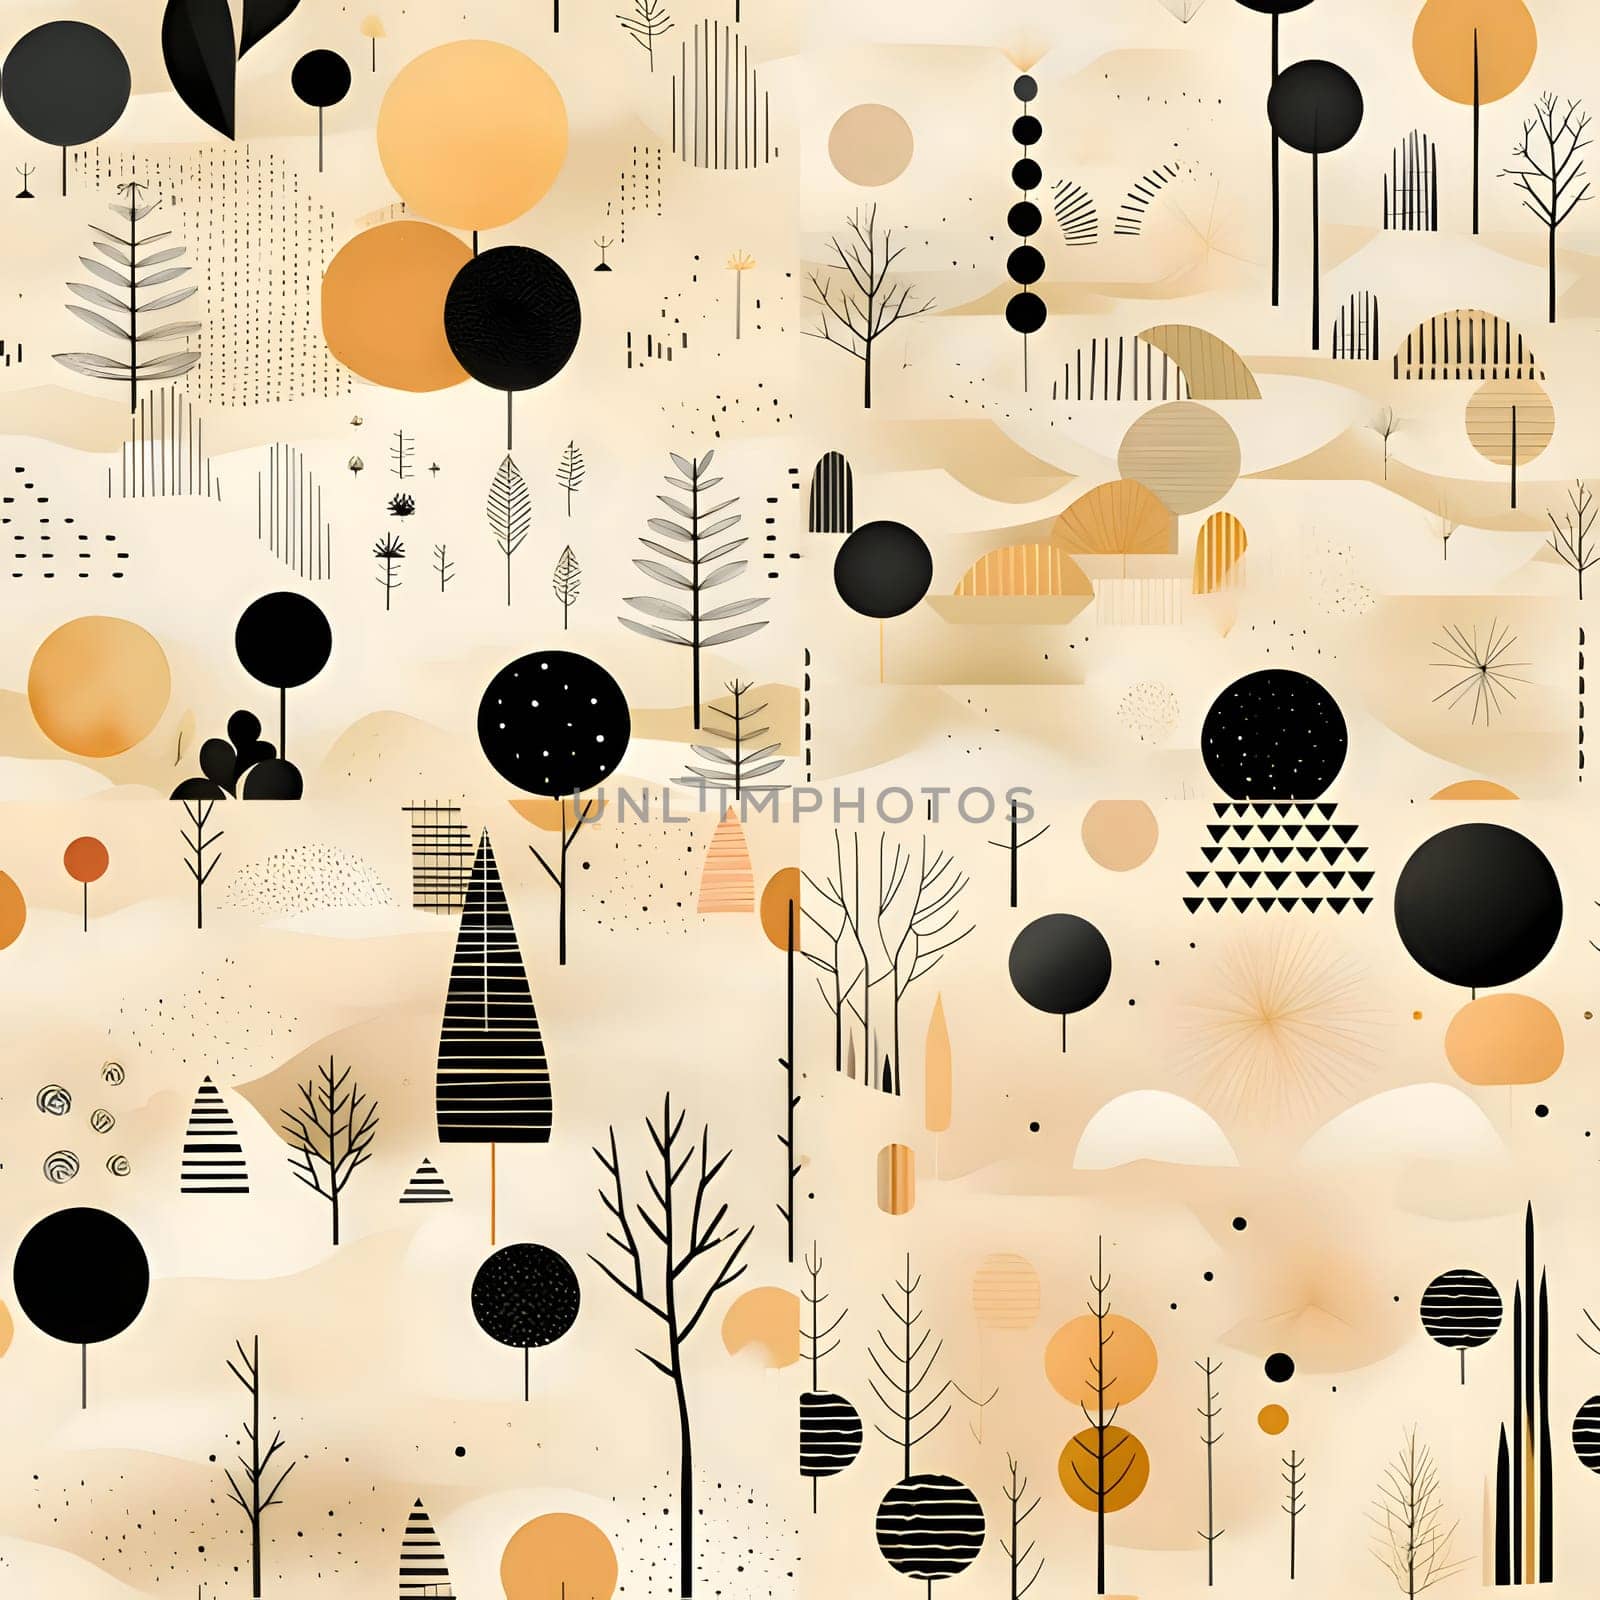 Patterns and banners backgrounds: Seamless pattern with autumn trees and circles. Vector illustration.